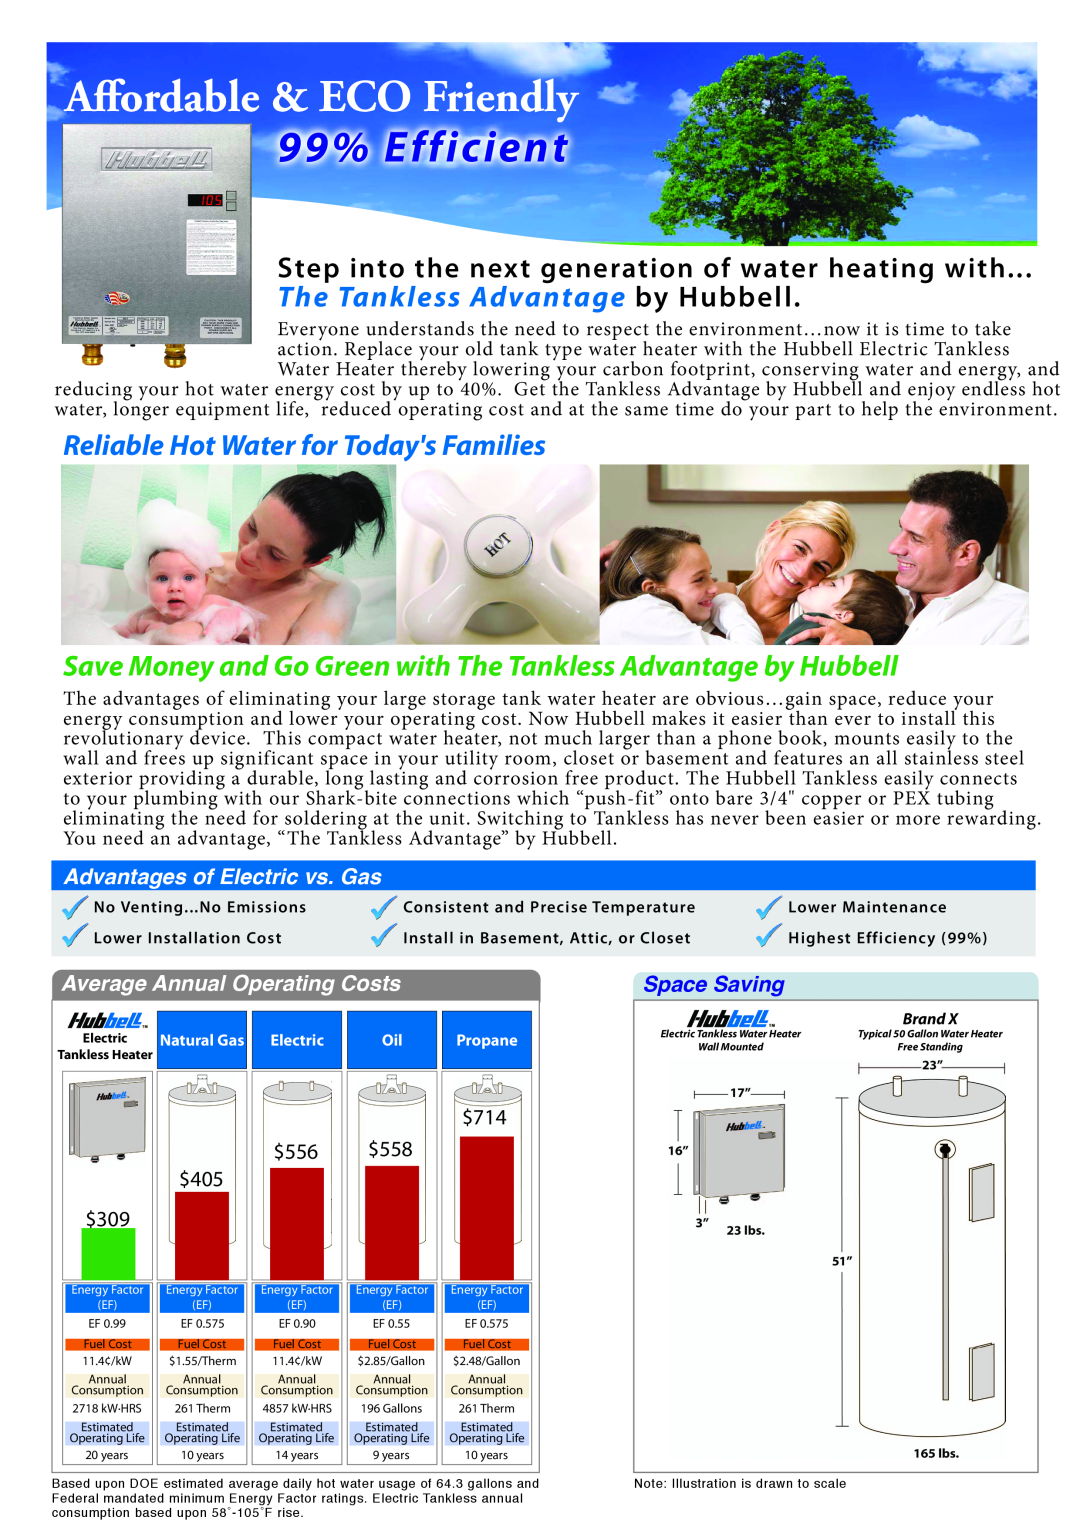 Hubbell Electric Heater Company 220-3 21 kW The Tankless Advantage by Hubbell, Reliable Hot Water for Todays Families 